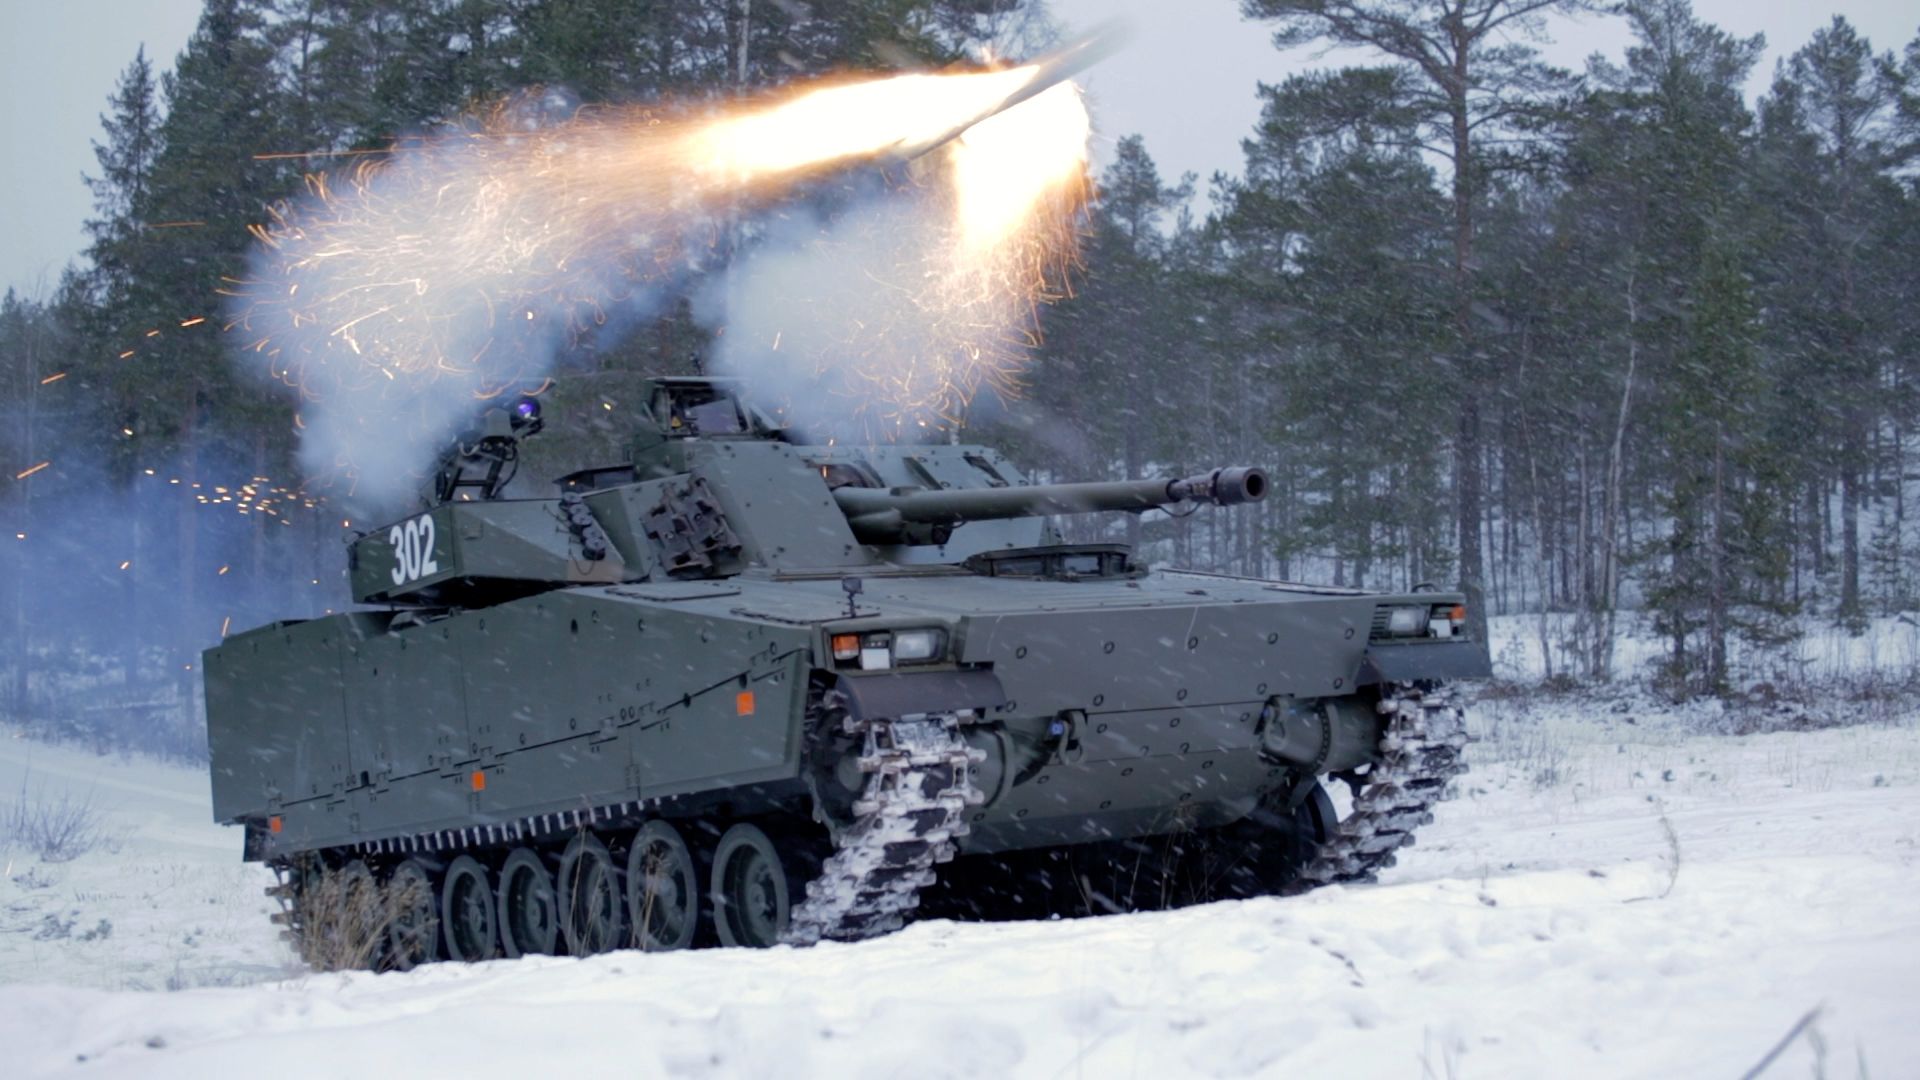 BAE Systems' CV90 Increases Lethality By Testing SPIKE LR Anti Tank Guided Missile